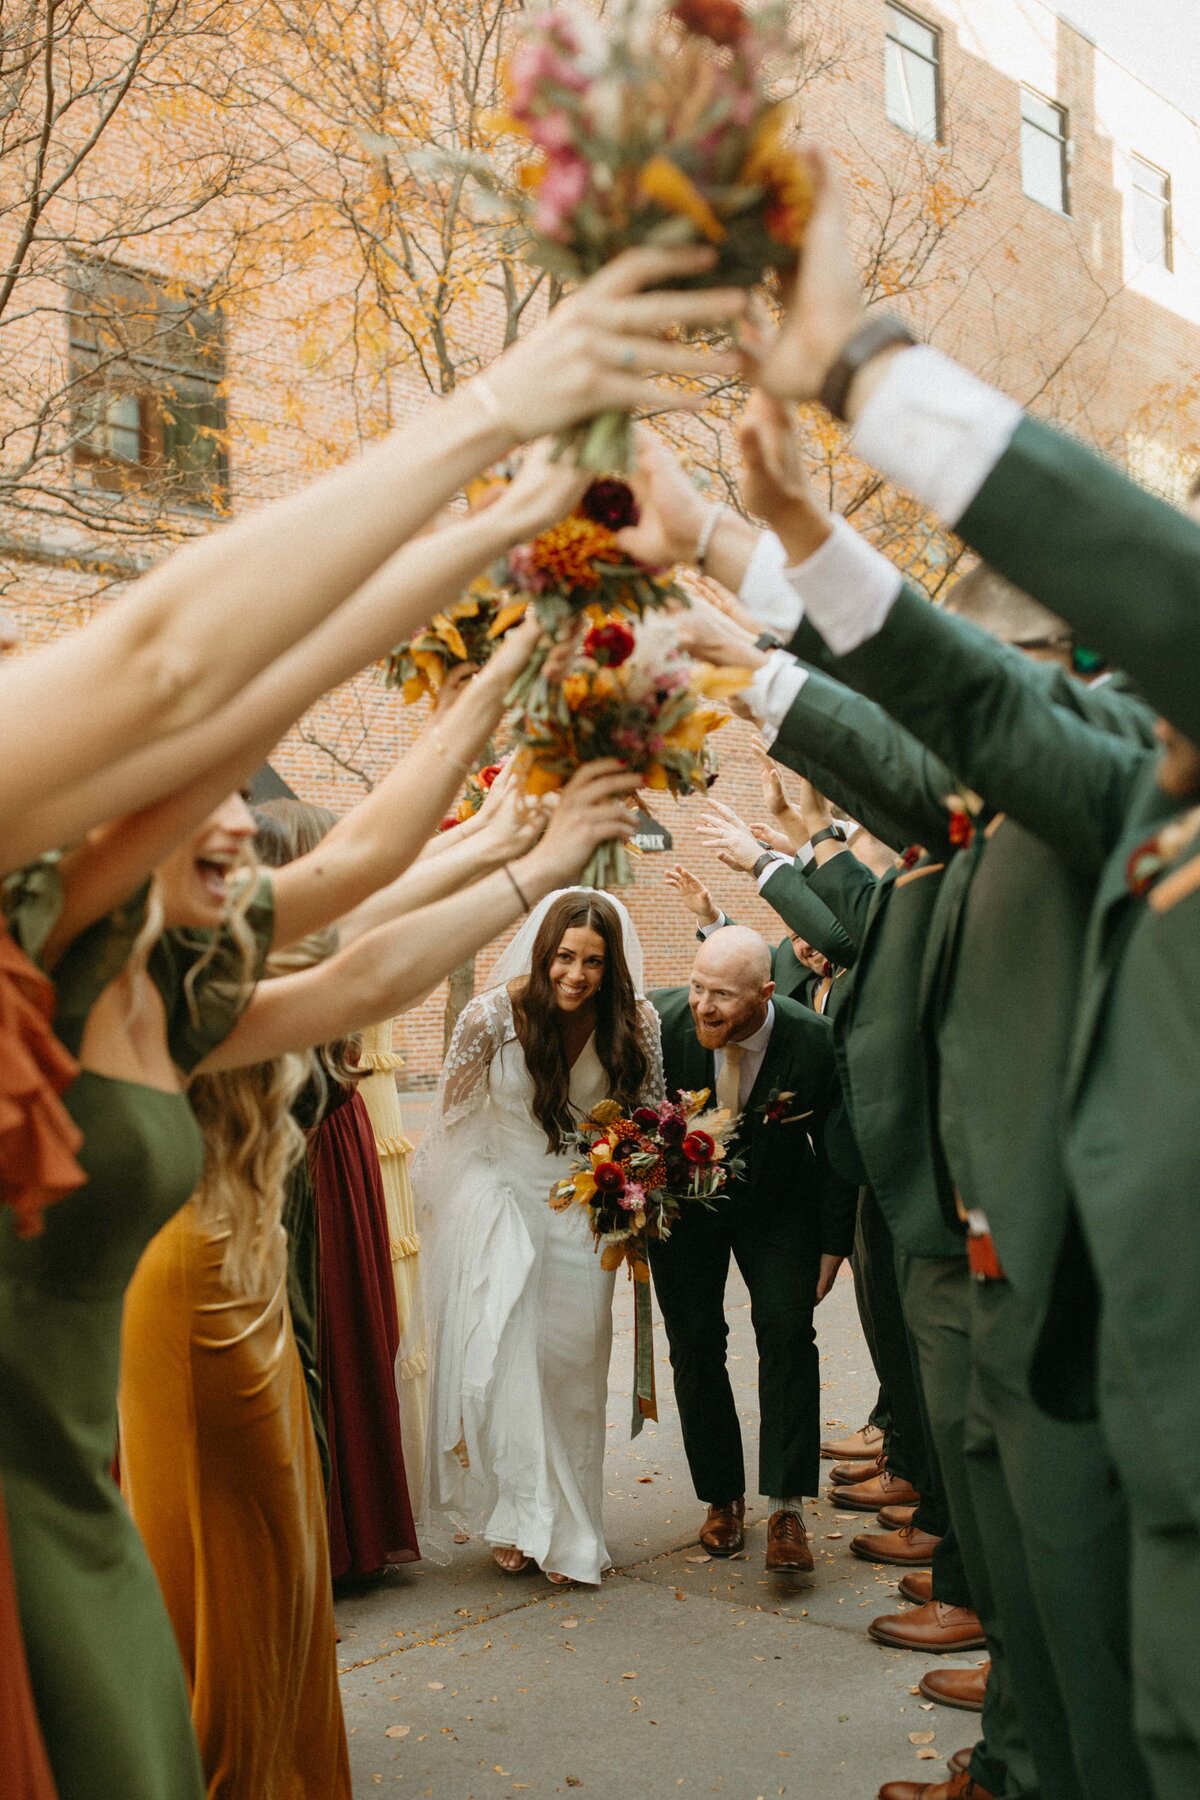 A bride and groom walk through a cheering crowd of guests at a park farm winery wedding, holding up flower bouquets, creating a tunnel of floral arches.